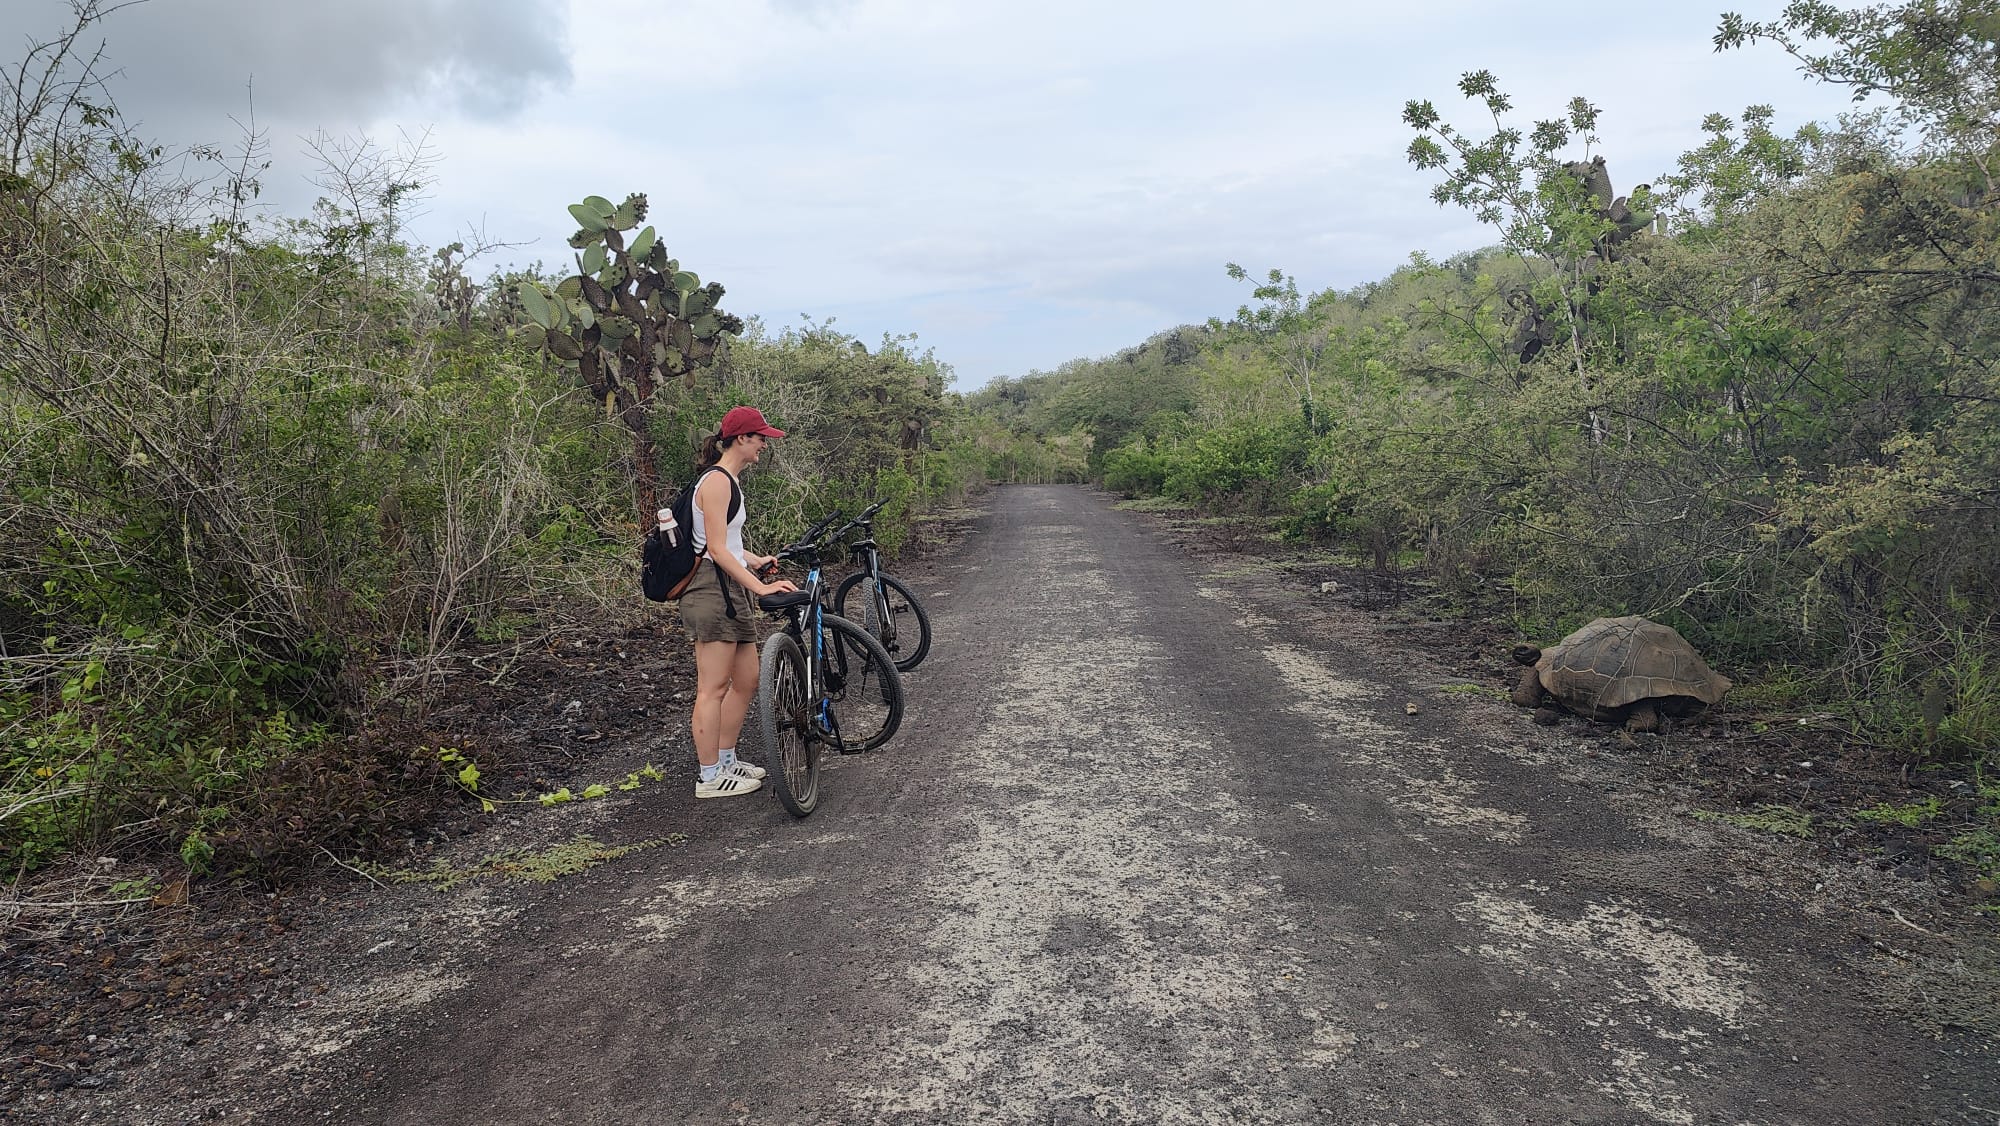 Pictured is me on a dirt pathway with my bike. On the other side of the dirt path is a wild tortoise that I am admiring. 